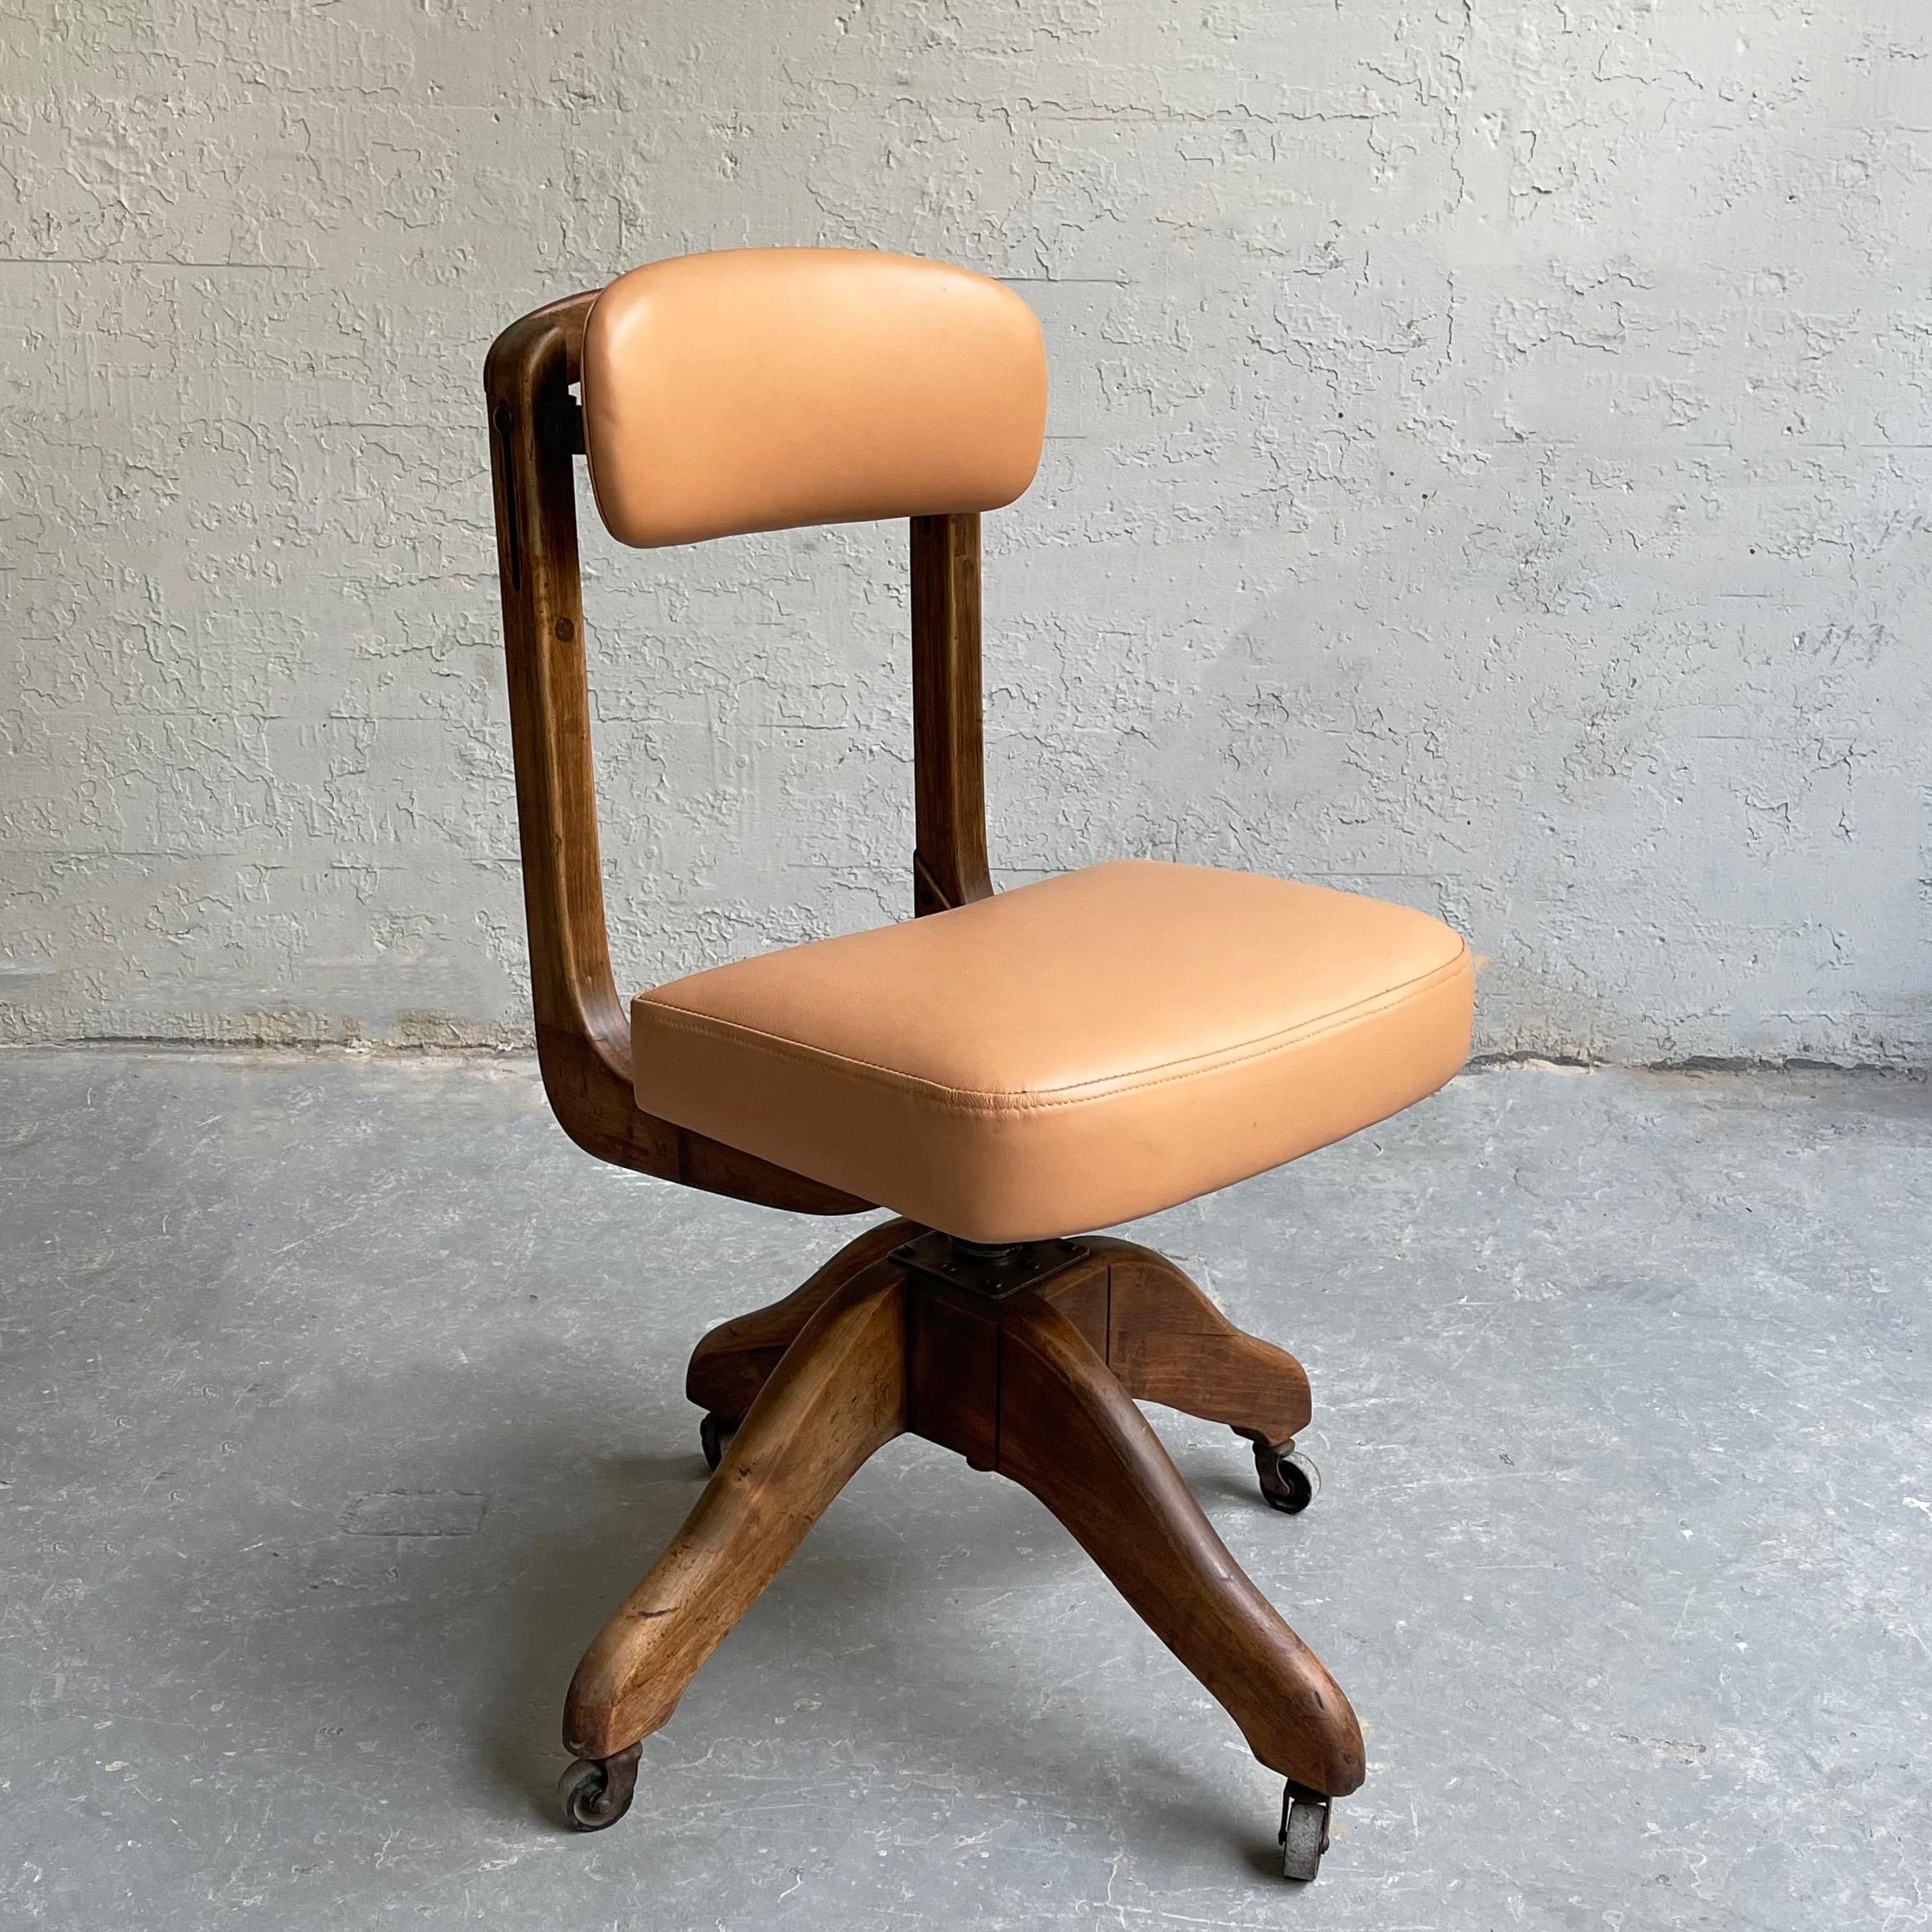 Industrial, midcentury, office desk chair by DoMore Chair Company features a height adjustable 16 - 19 inch, rolling, swivel oak frame with newly upholstered blush pink leather seat and back. The back height is also adjustable.